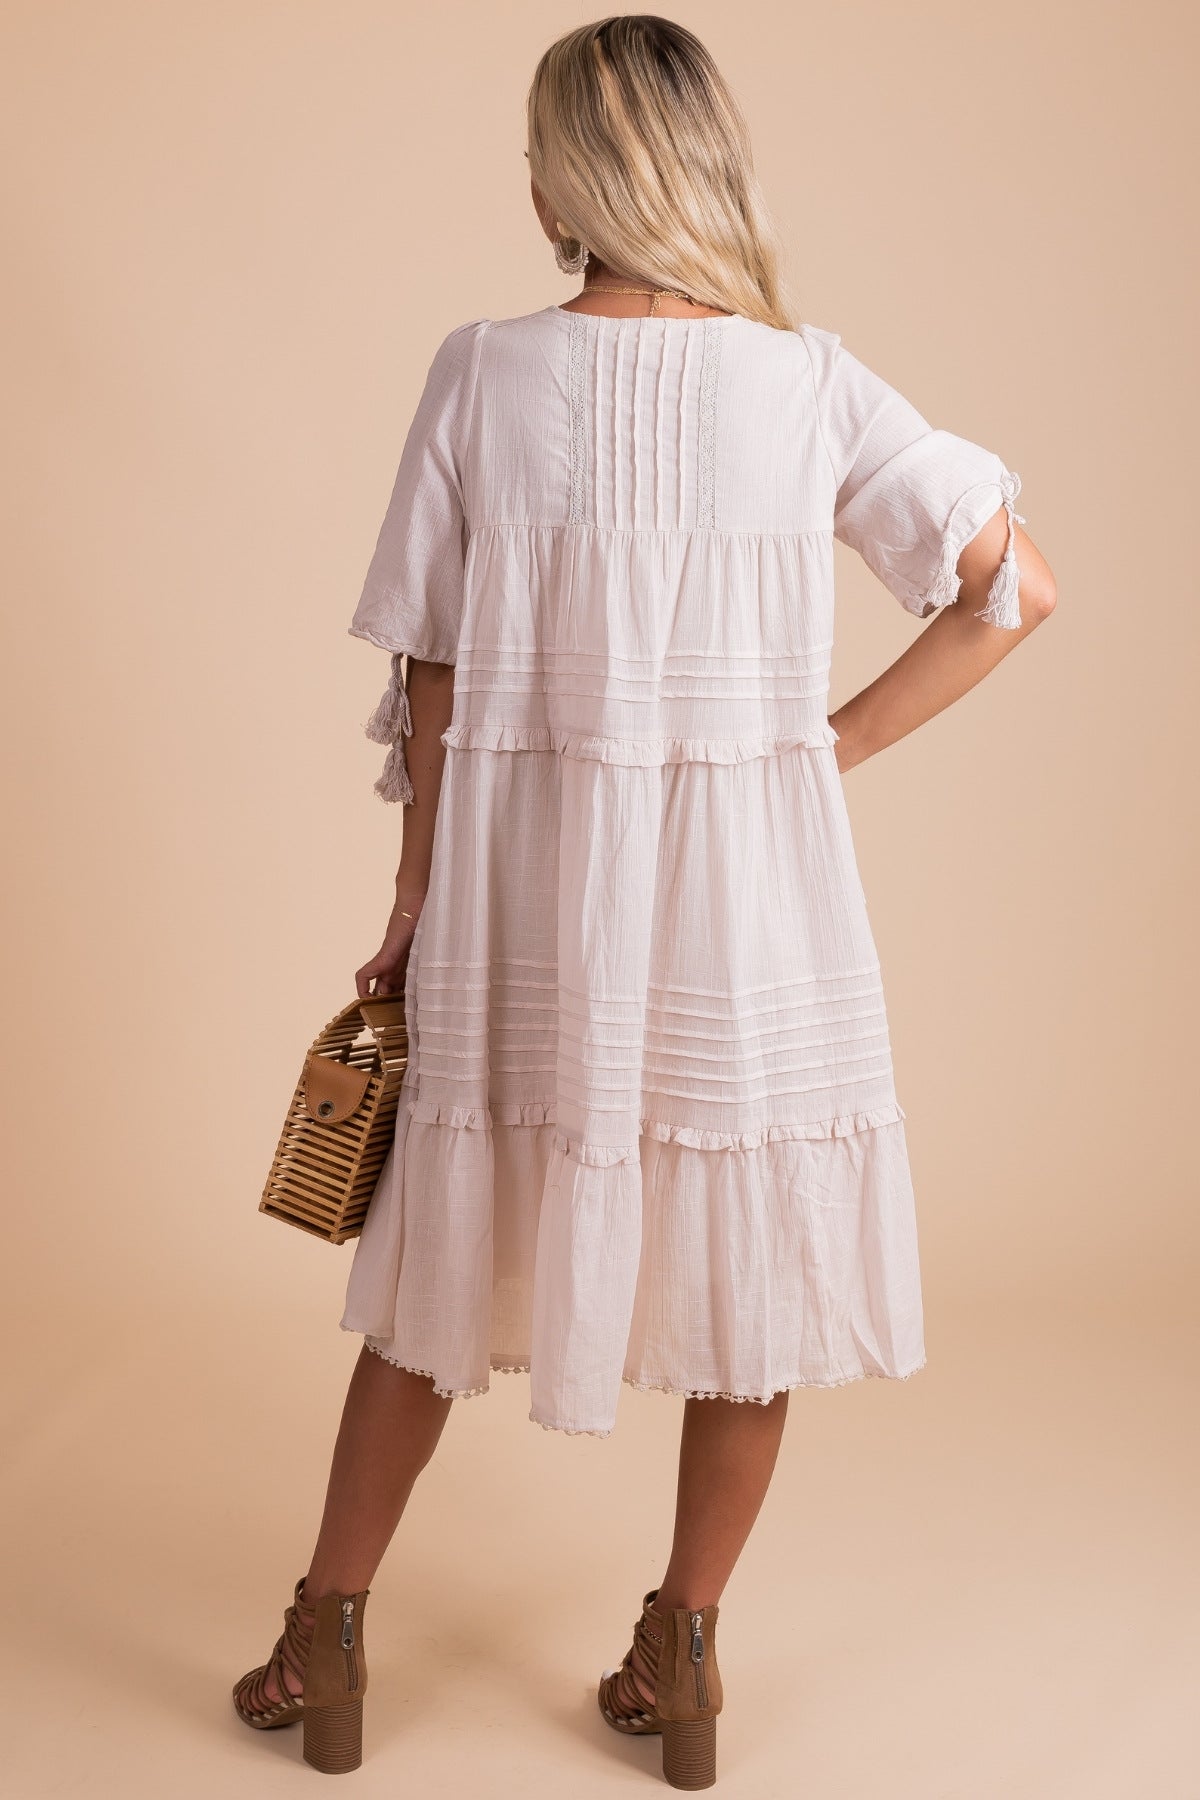 Midi Dress in Off White Natural Color for Women